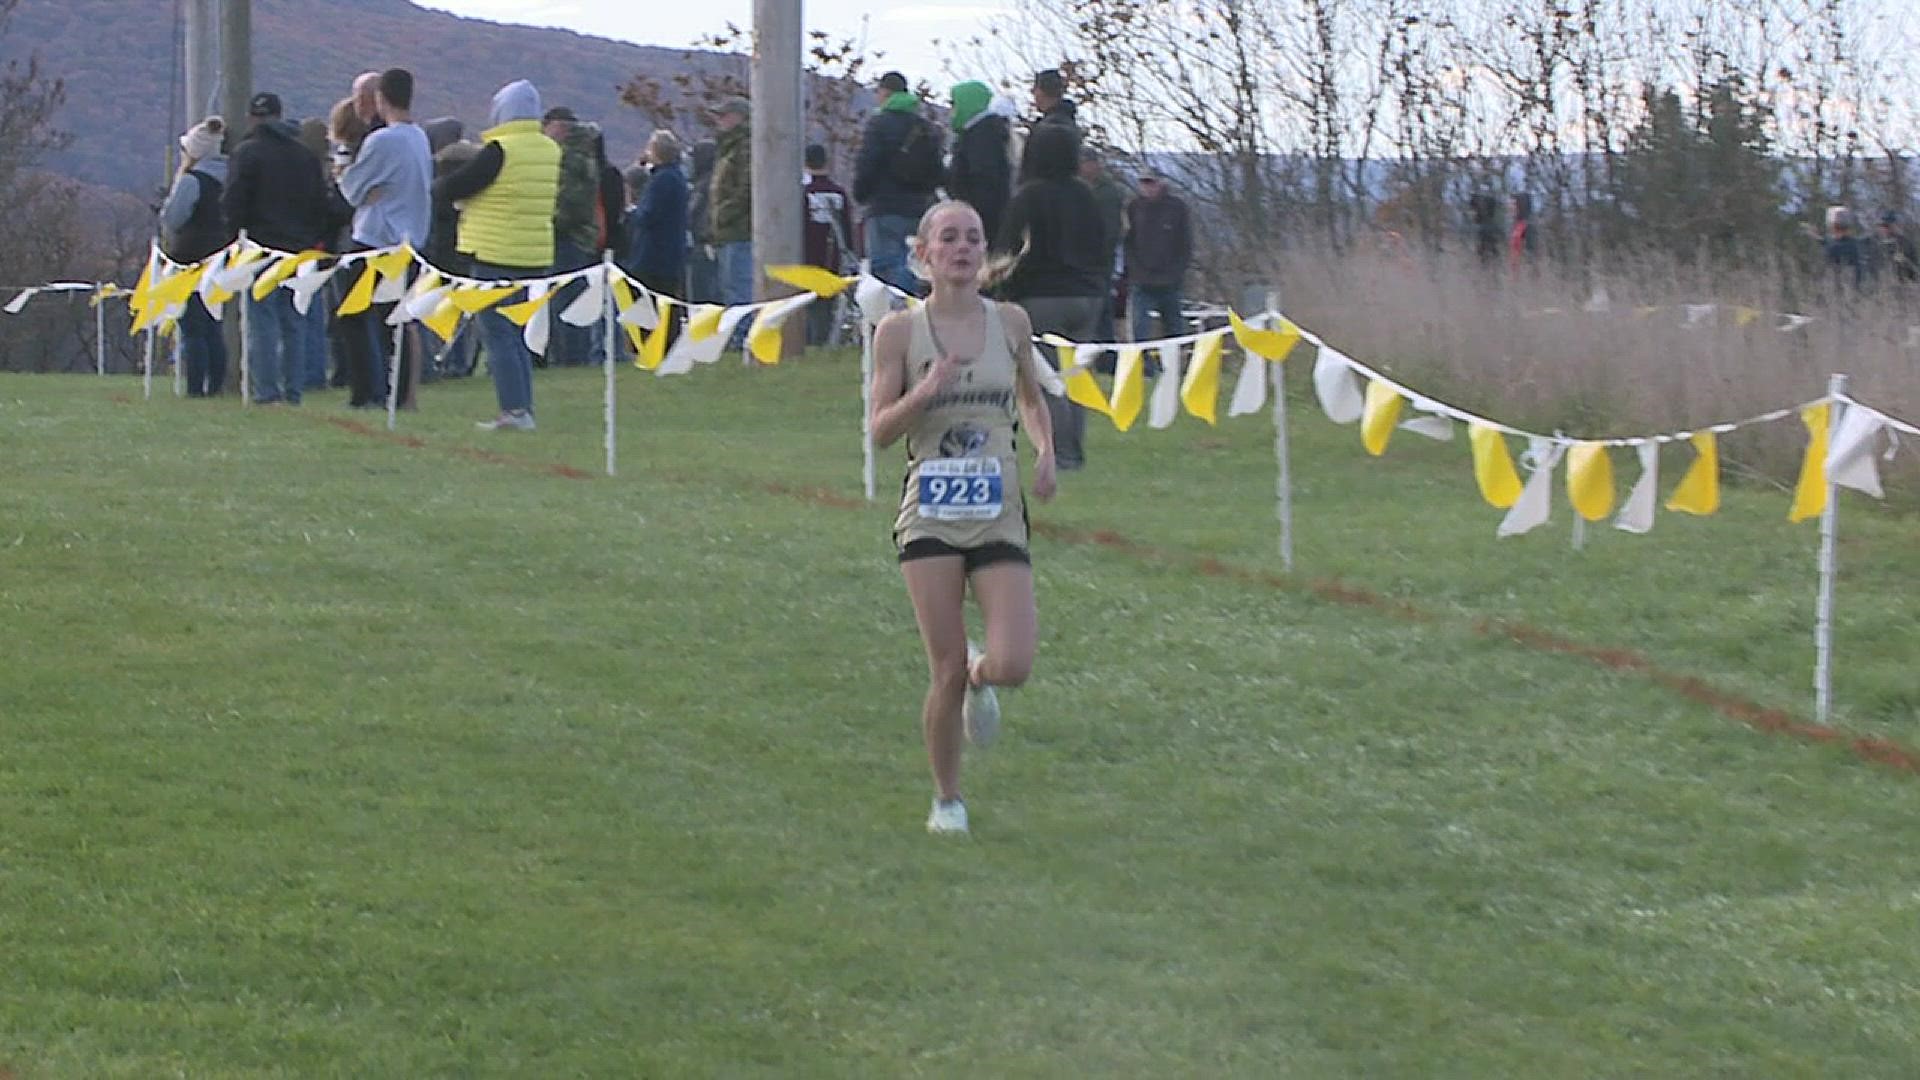 Moncavage and Espinosa earn the victories in the girl's races at Bloomsburg University